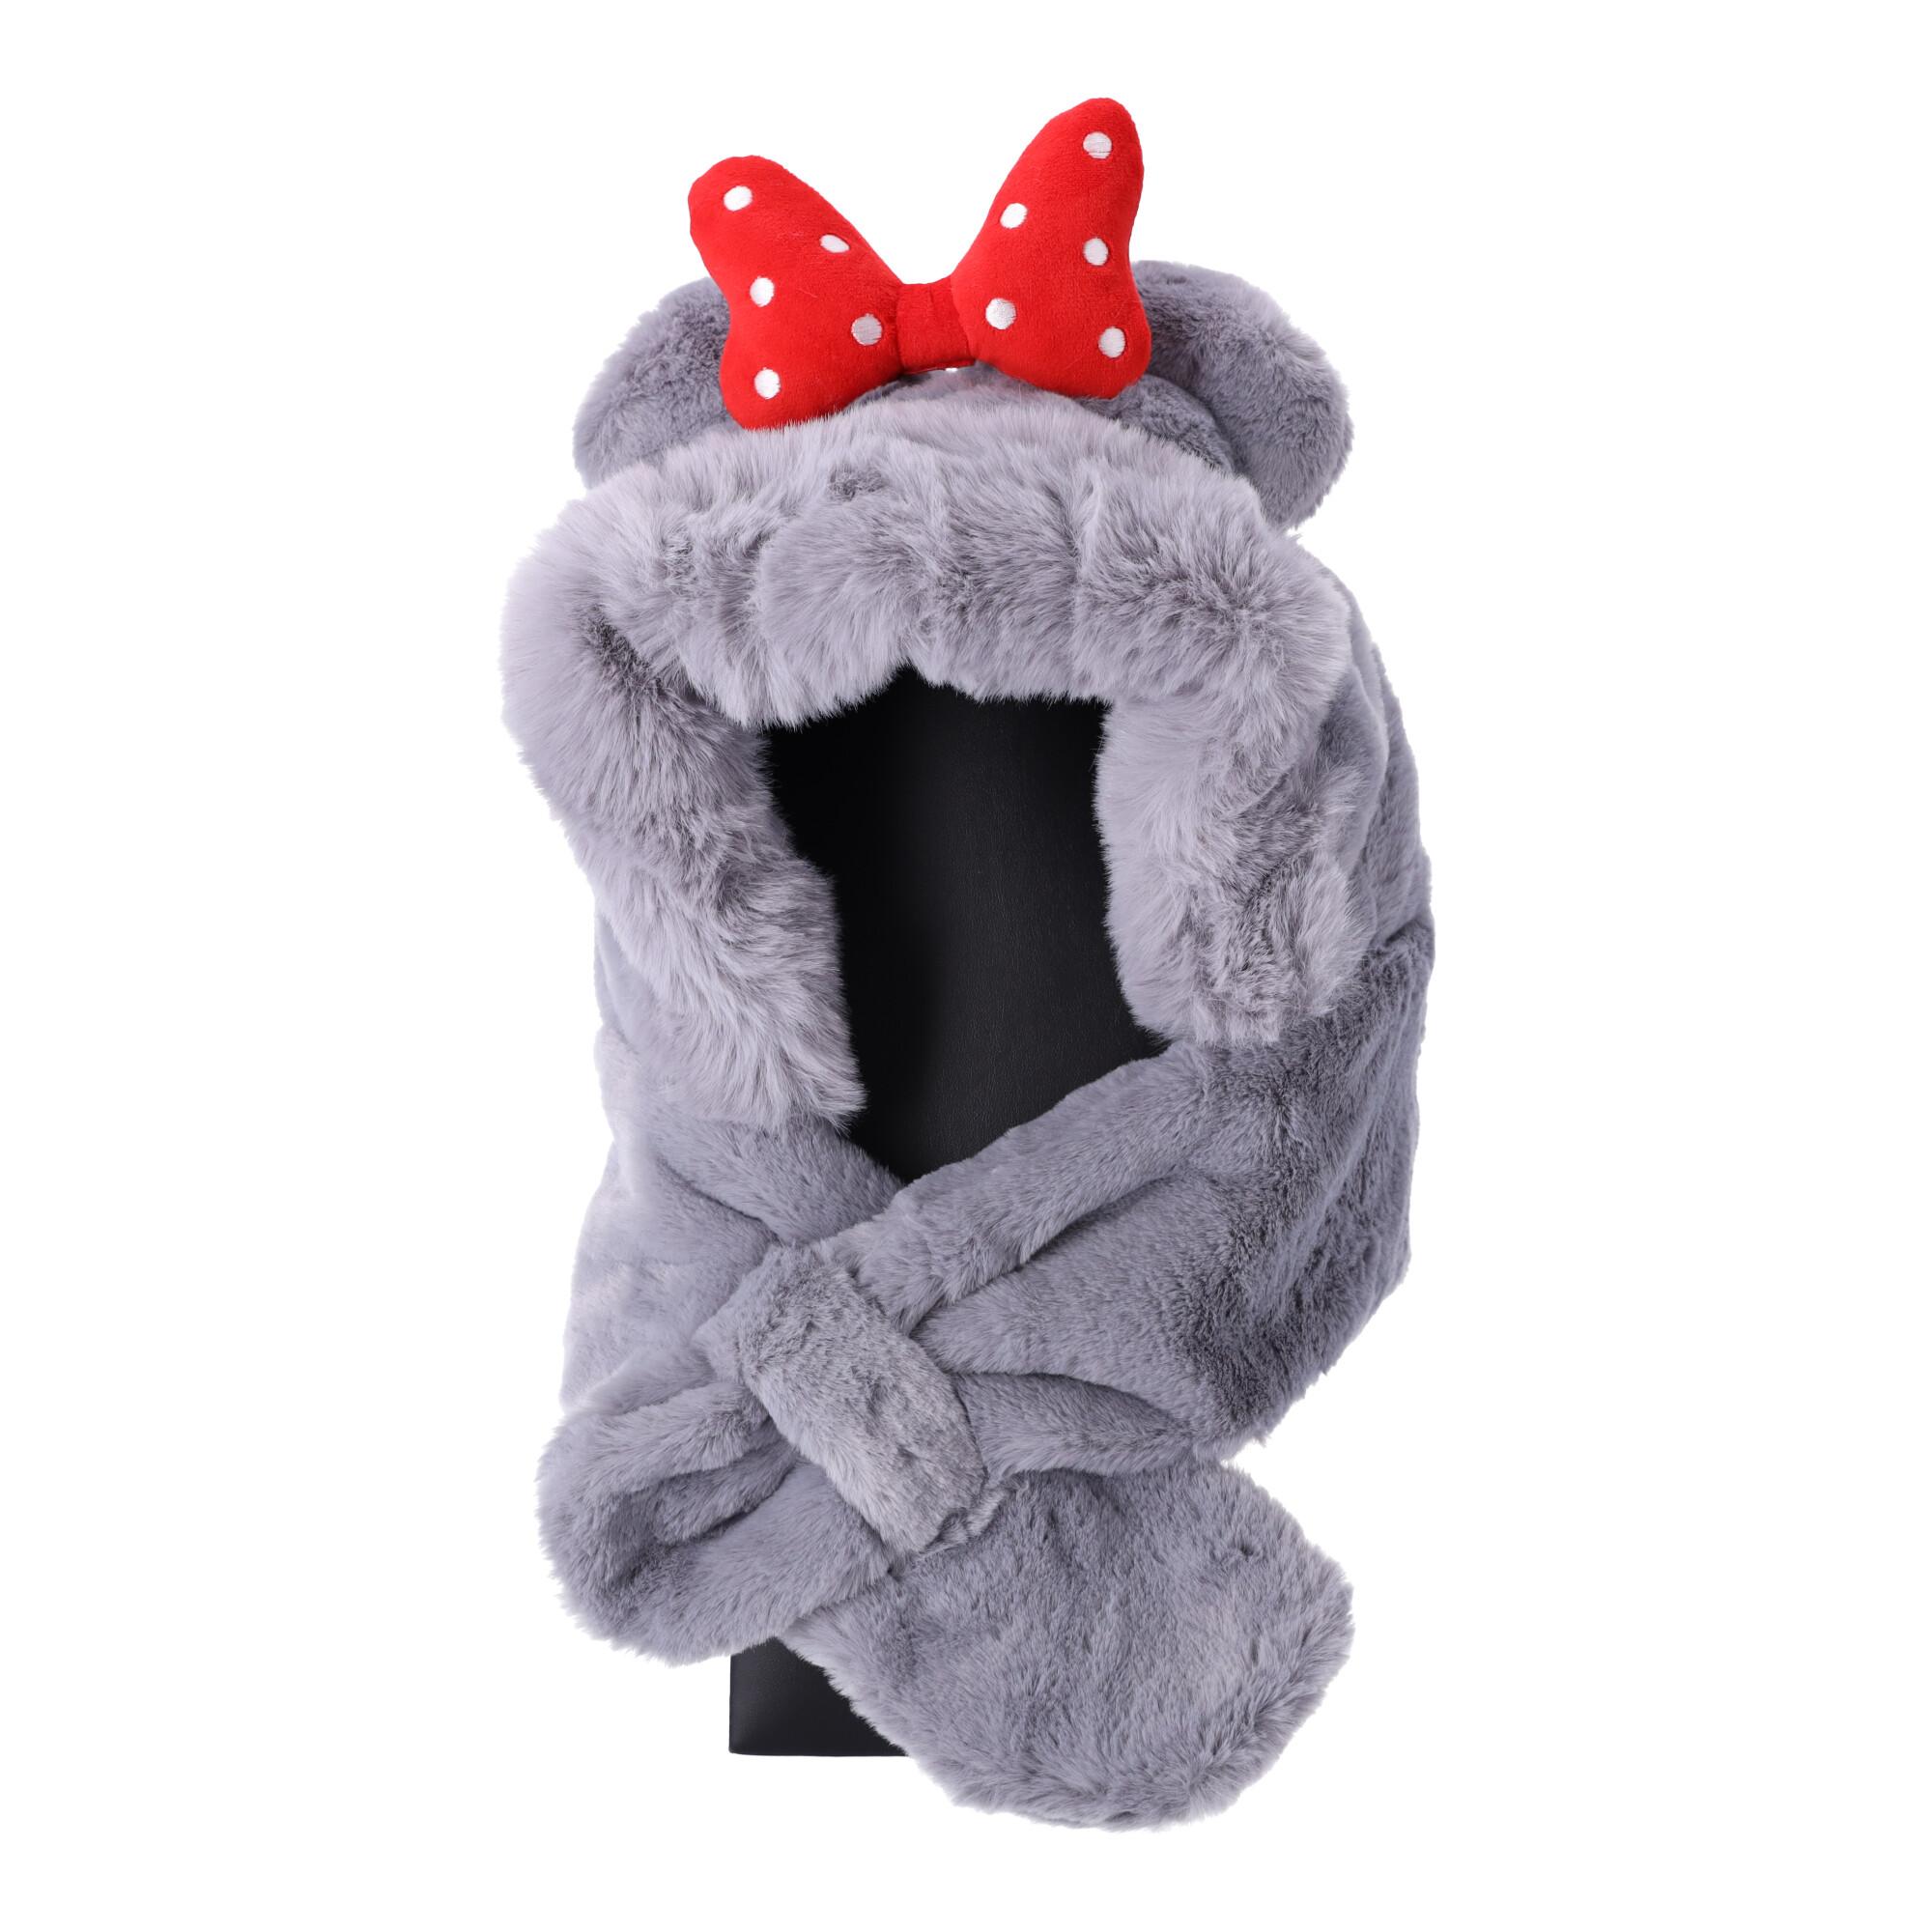 Children's plush hat with a scarf for children aged 1 to 8 - gray with a red bow